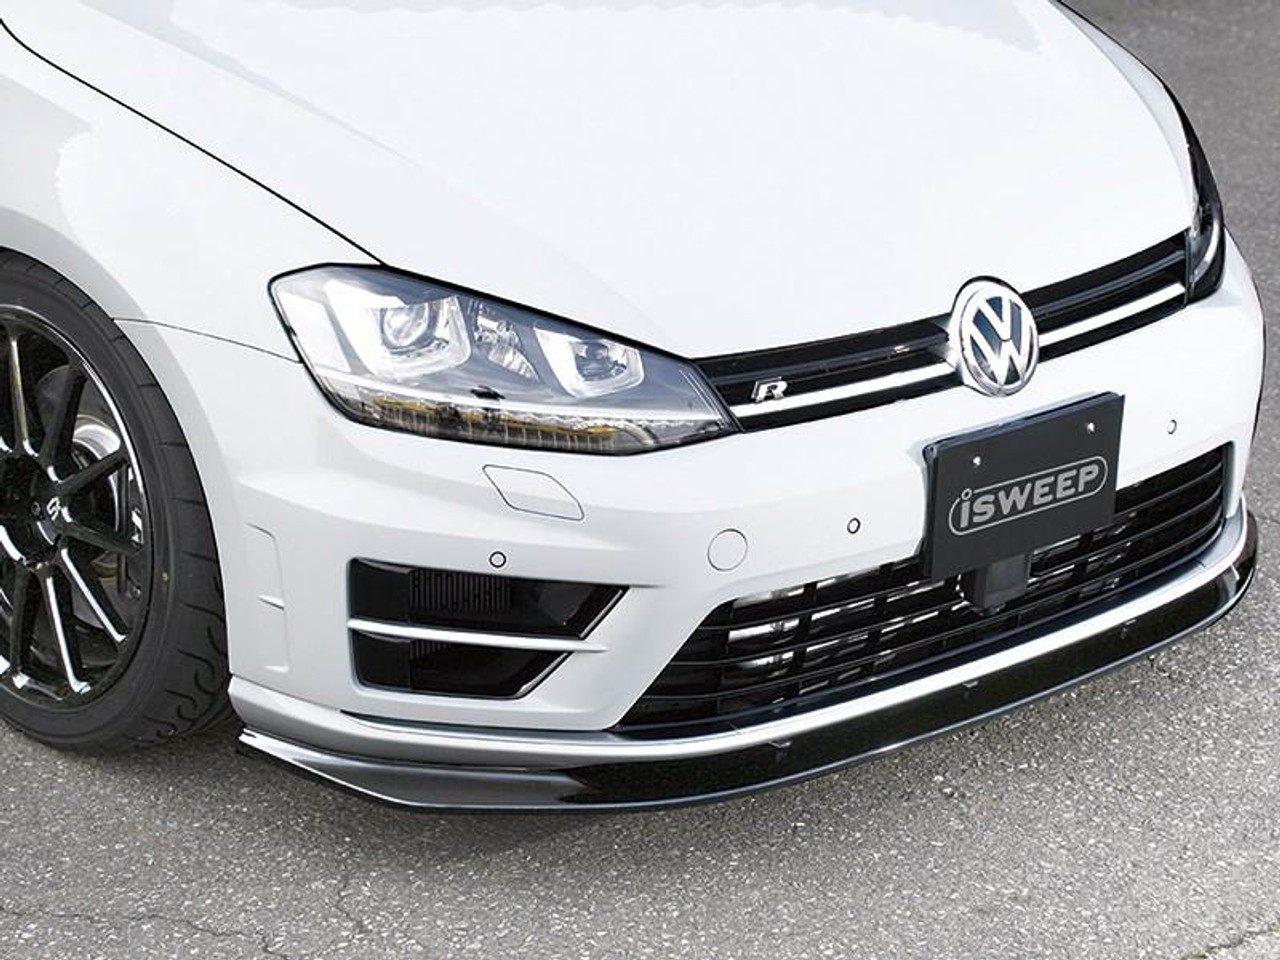 iSweep MK7 Golf R Front Lip Spoiler